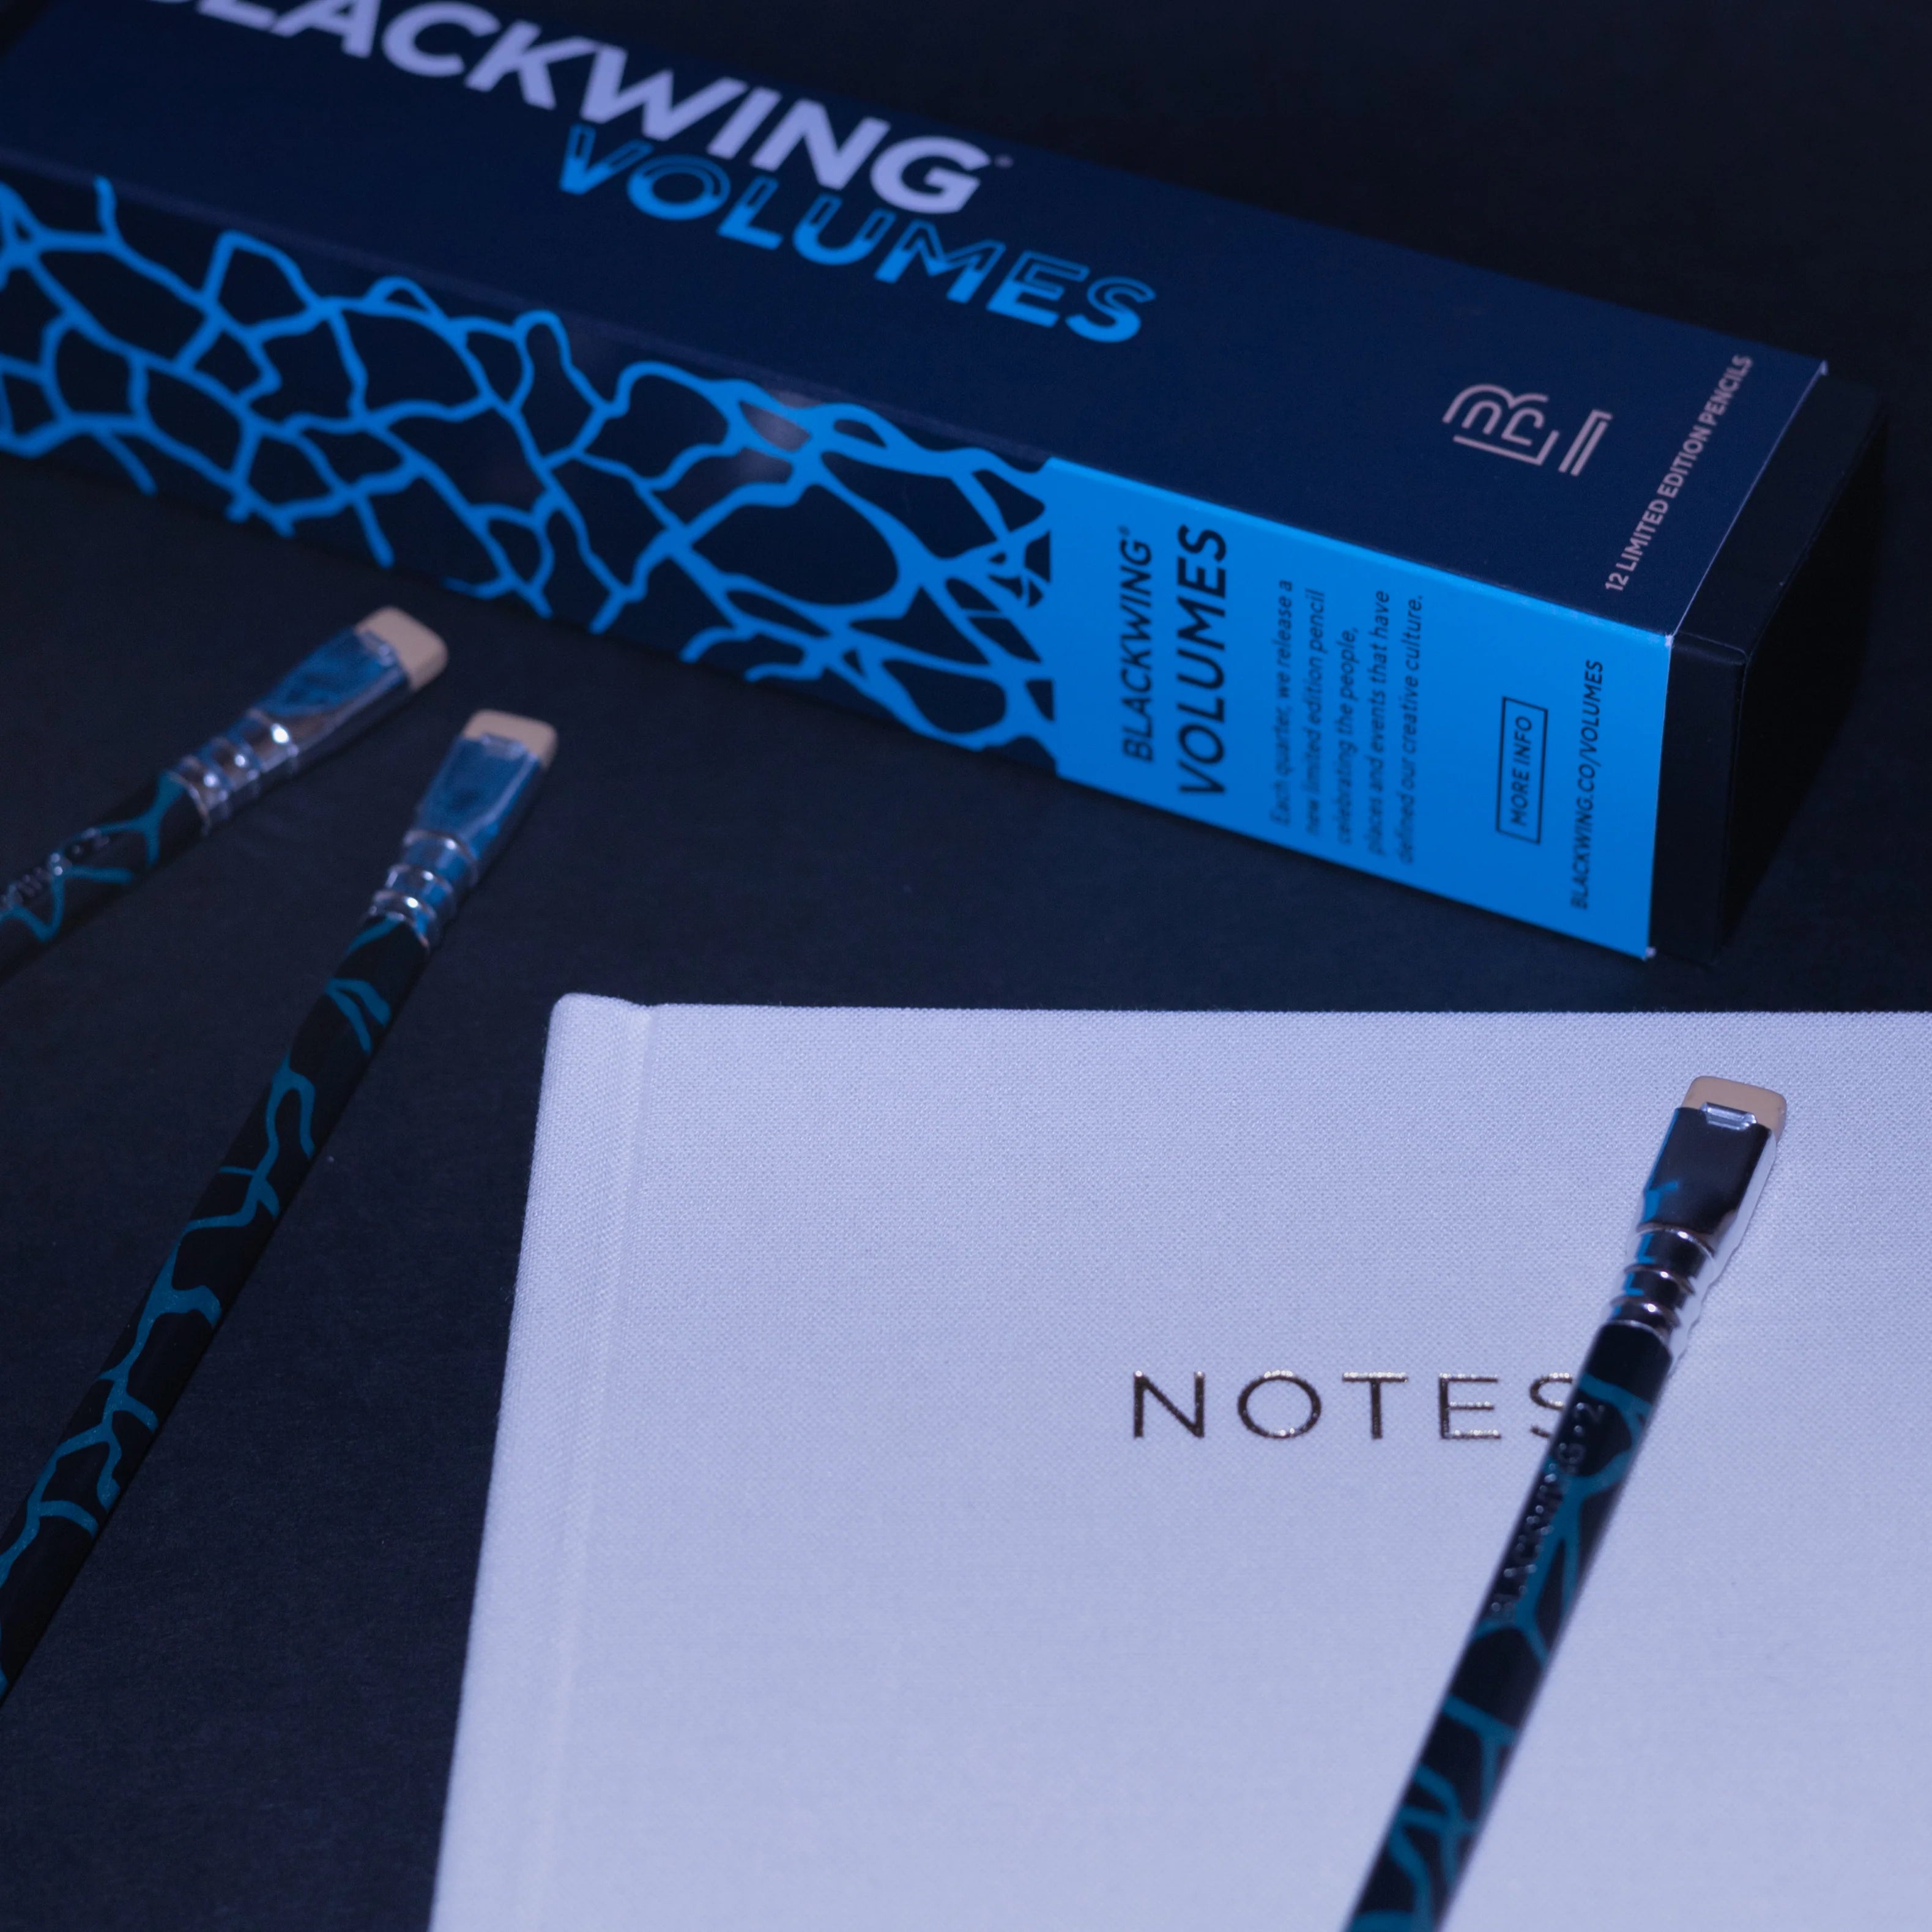 Blackwing Limited Edition Vol. 2 (12 Pencils)